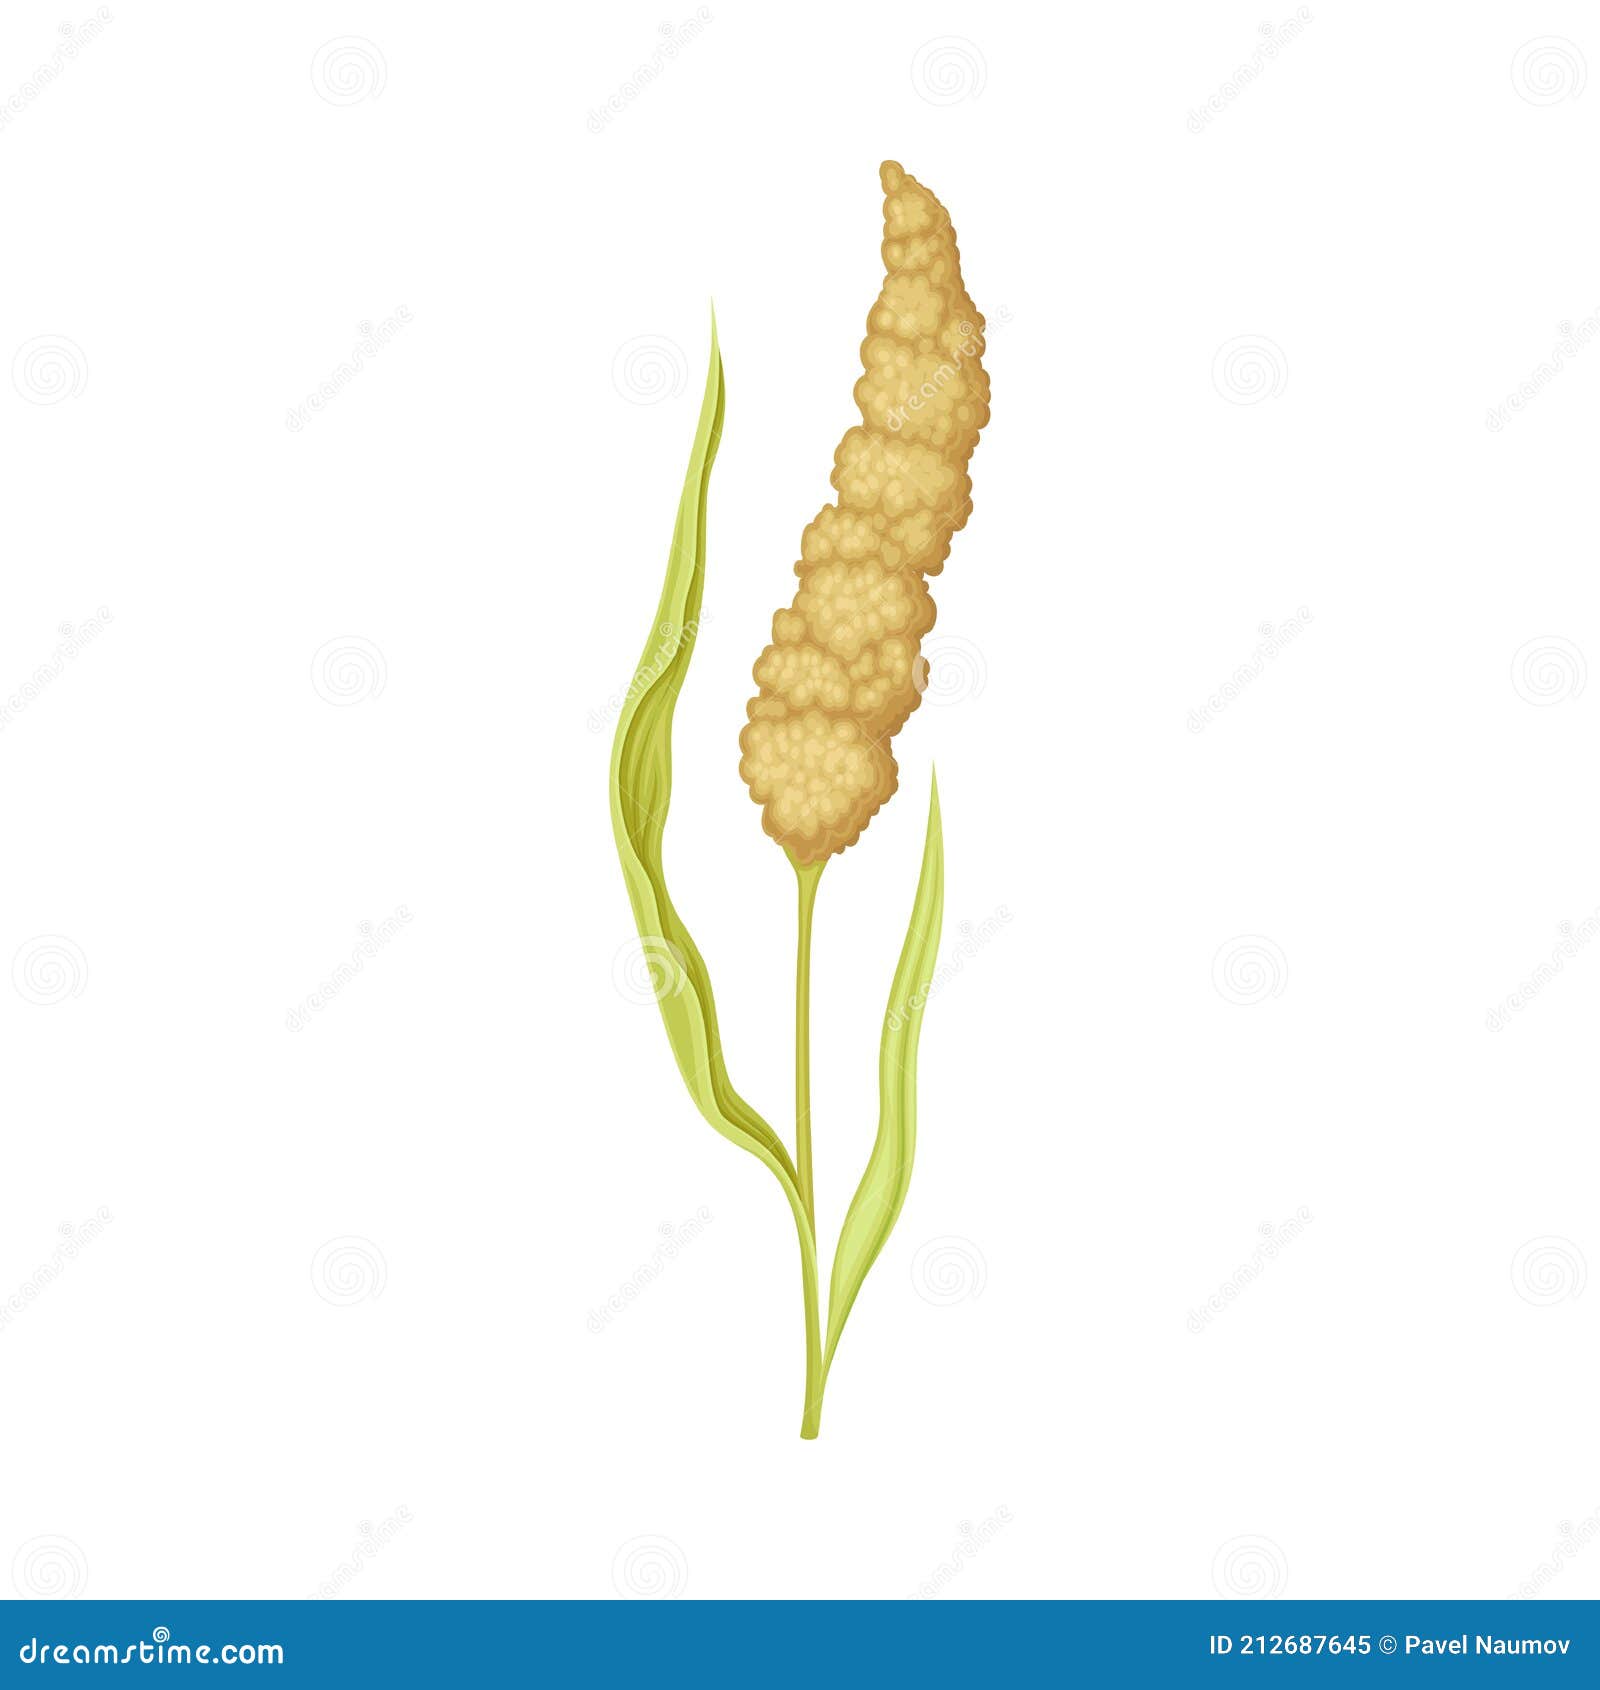 sorghum as grain crop or cereal specie and cultivated grass on stalk with inflorescences  